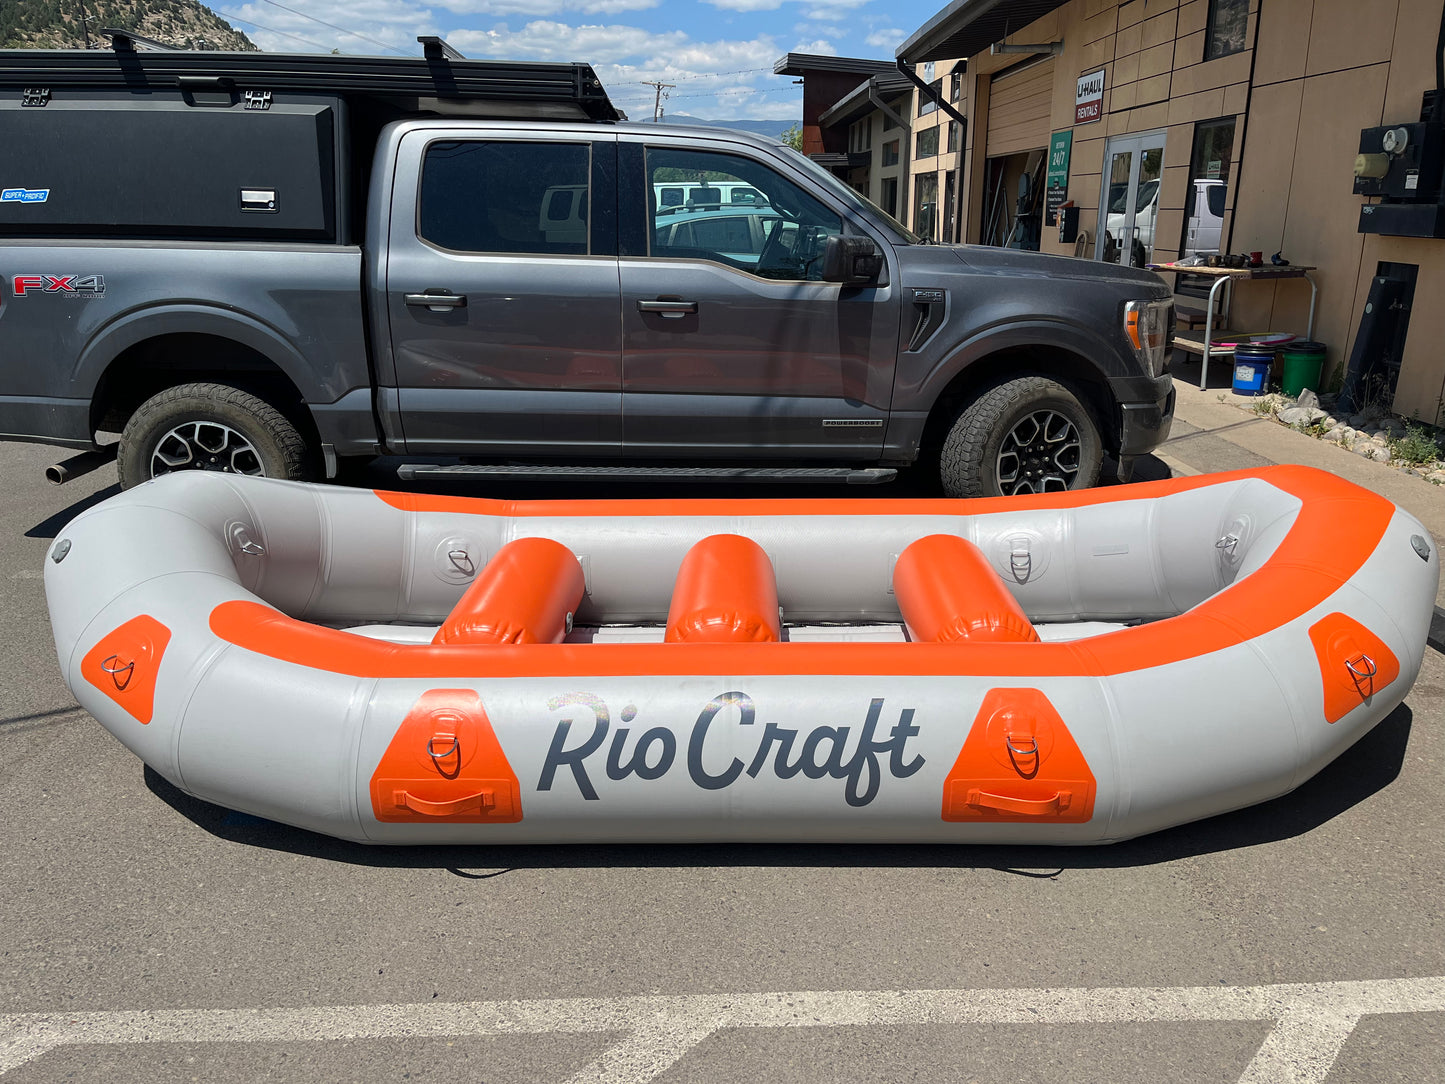 The Consignment 13' Colorado raft from Rio Craft is parked in front of a truck.